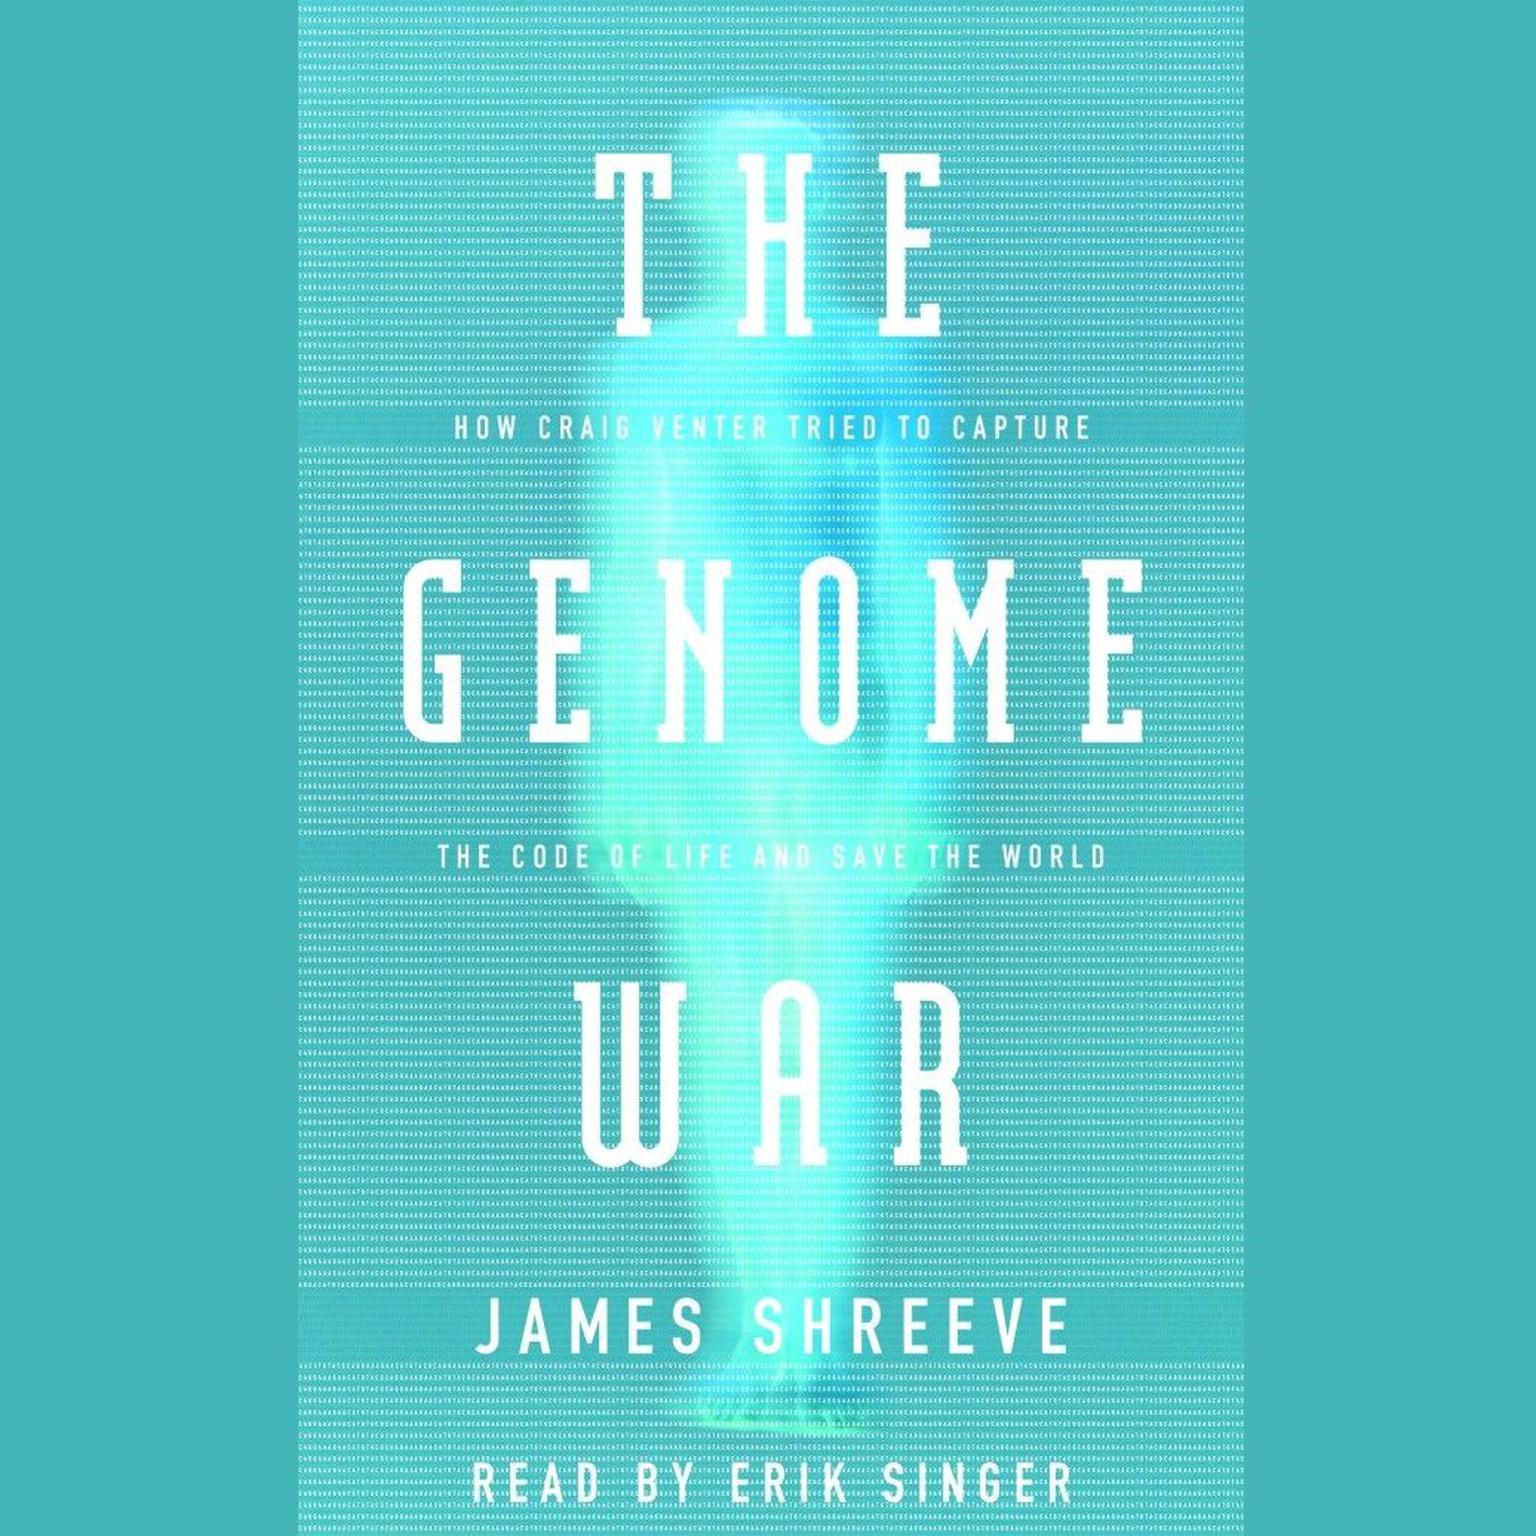 The Genome War (Abridged): How Craig Venter Tried to Capture the Code of Life and Save the World Audiobook, by James Shreeve